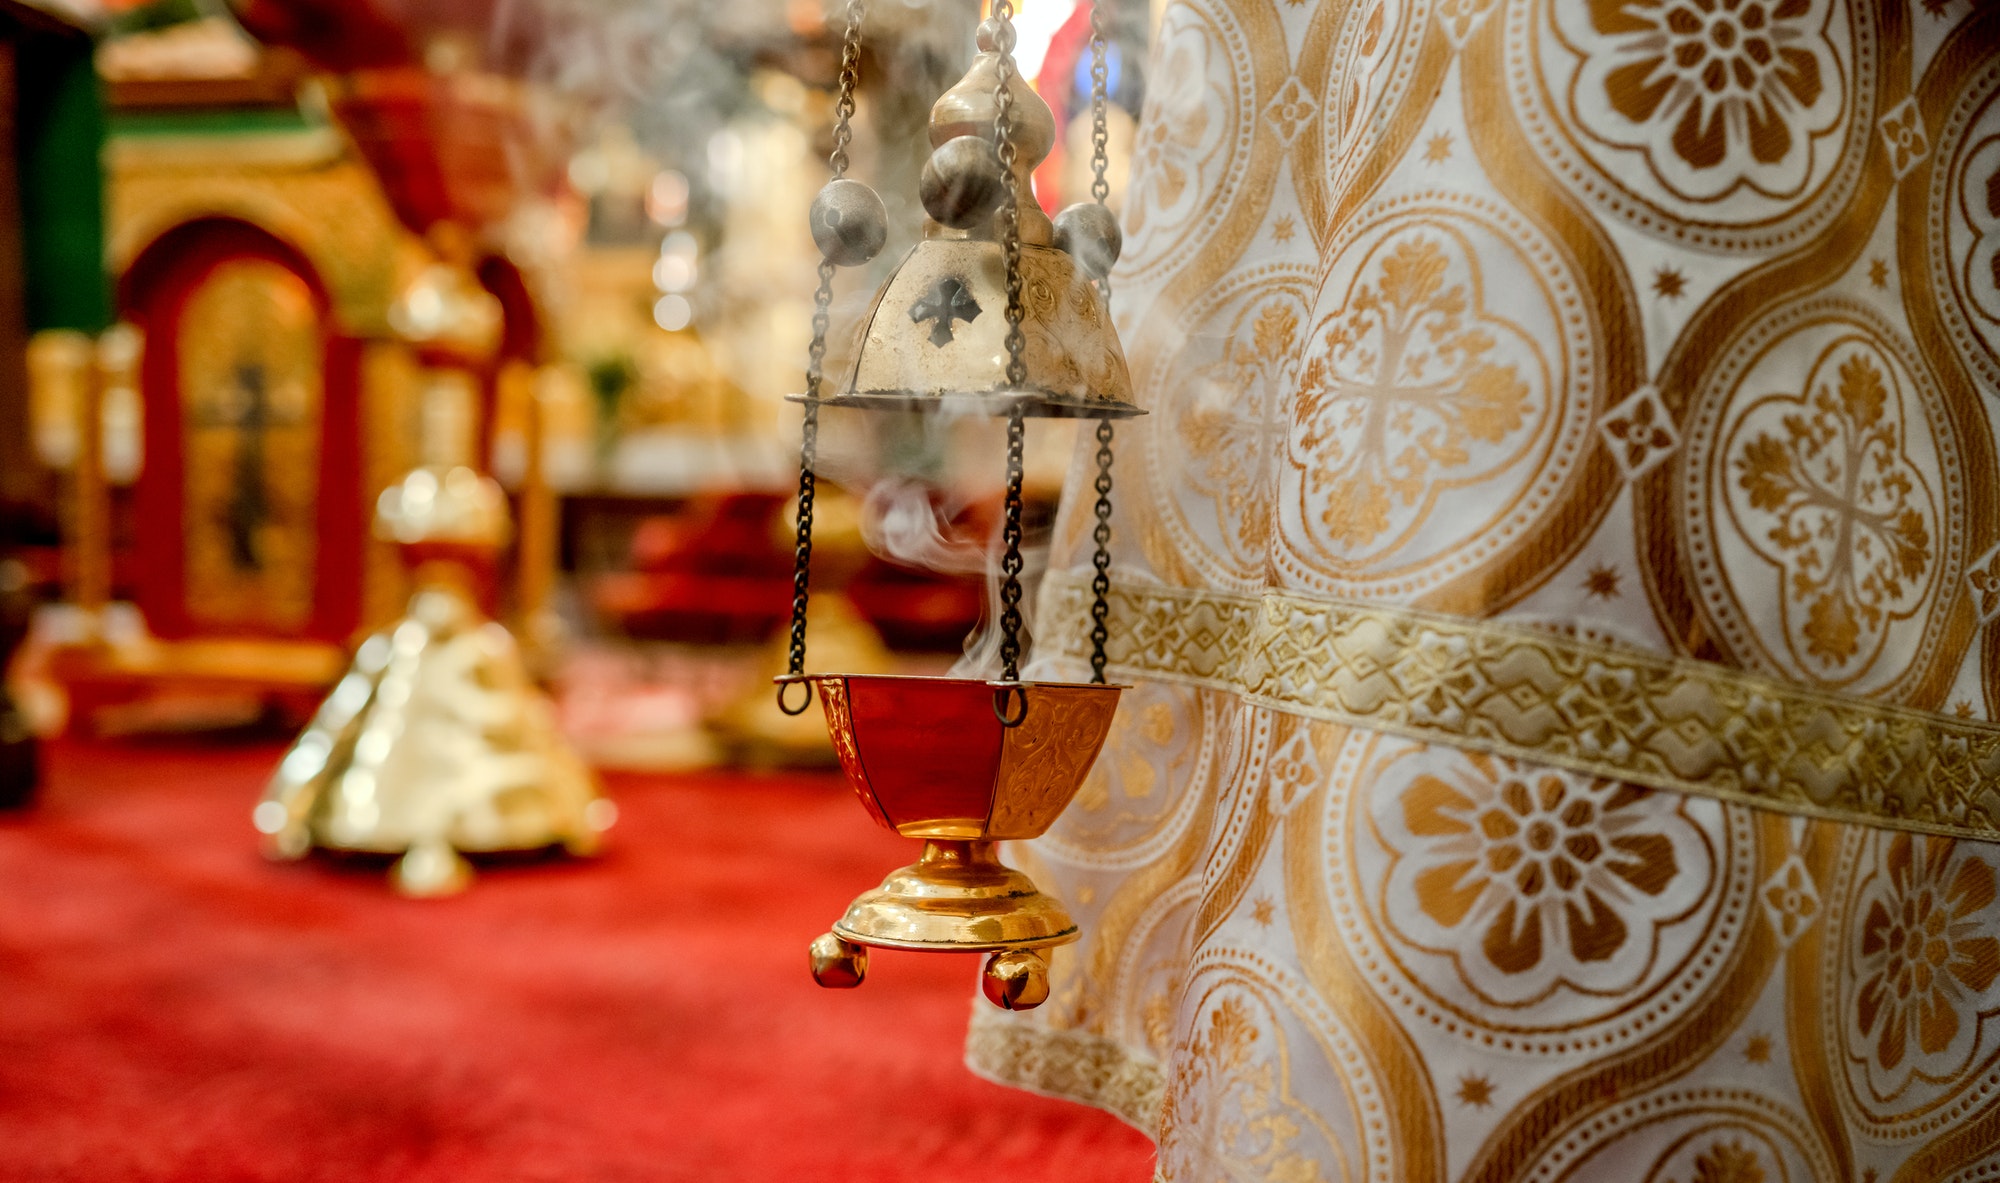 The priest's incense in a hangs in the Orthodox Church